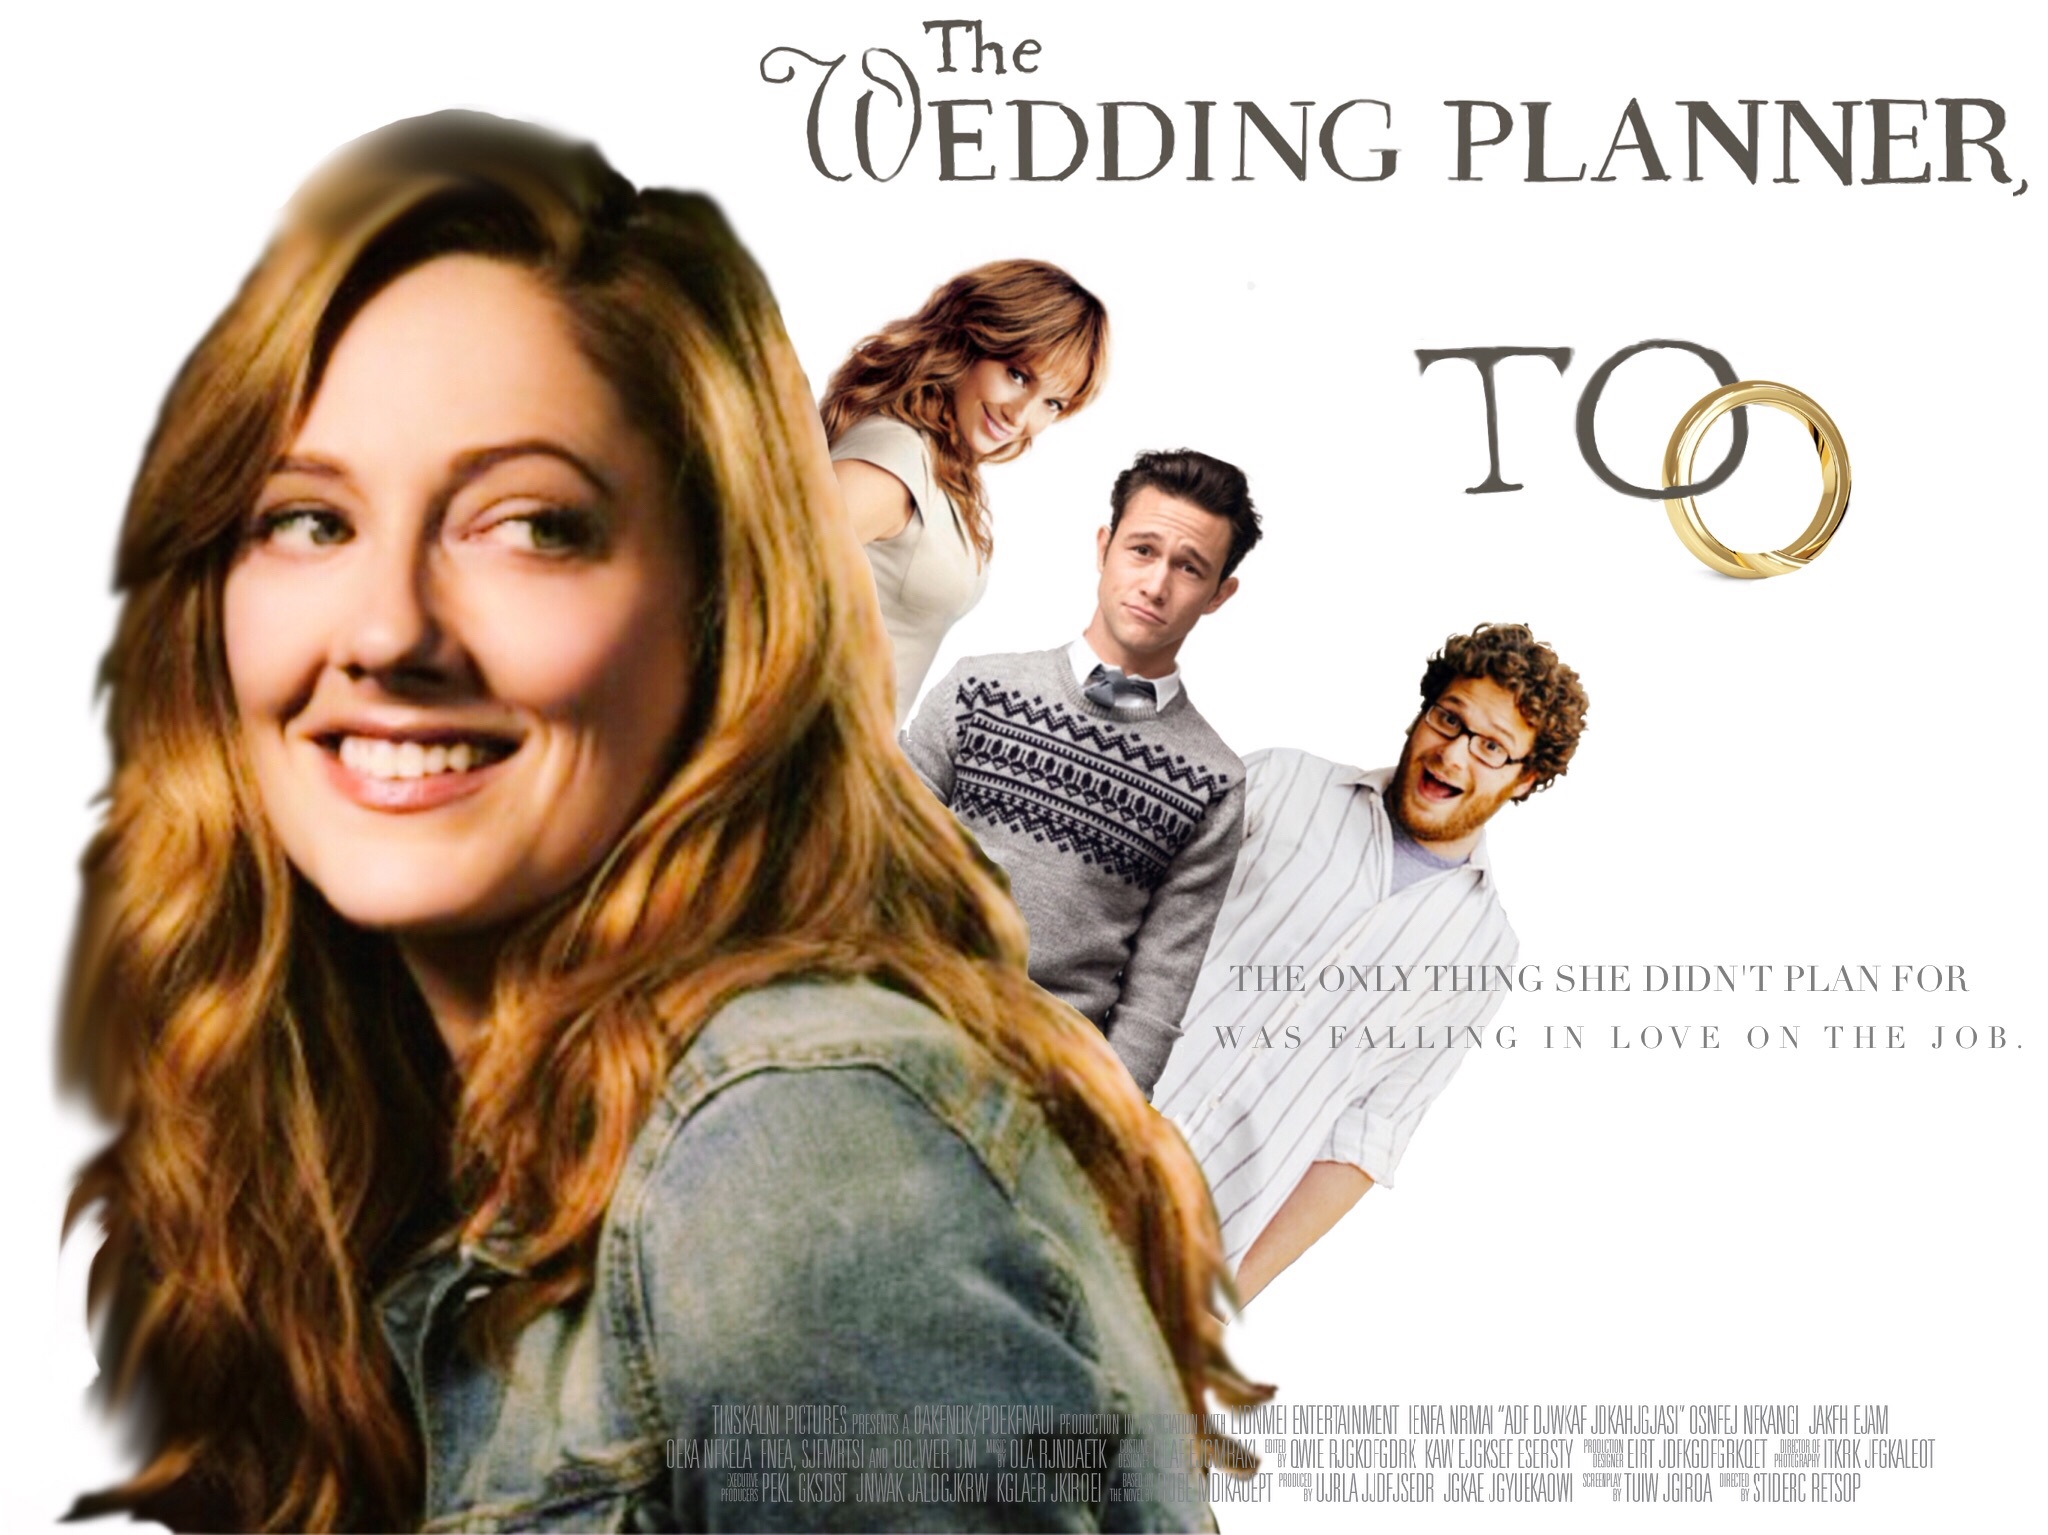 Episode 33 - The Wedding Planner, Too feat. Sara Murray